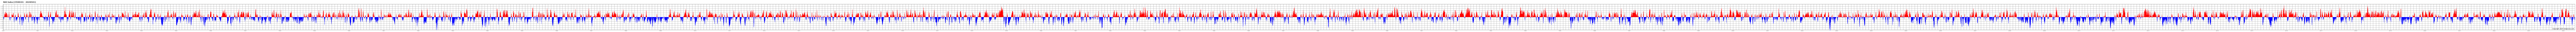 NAO Index since 1950, daily values